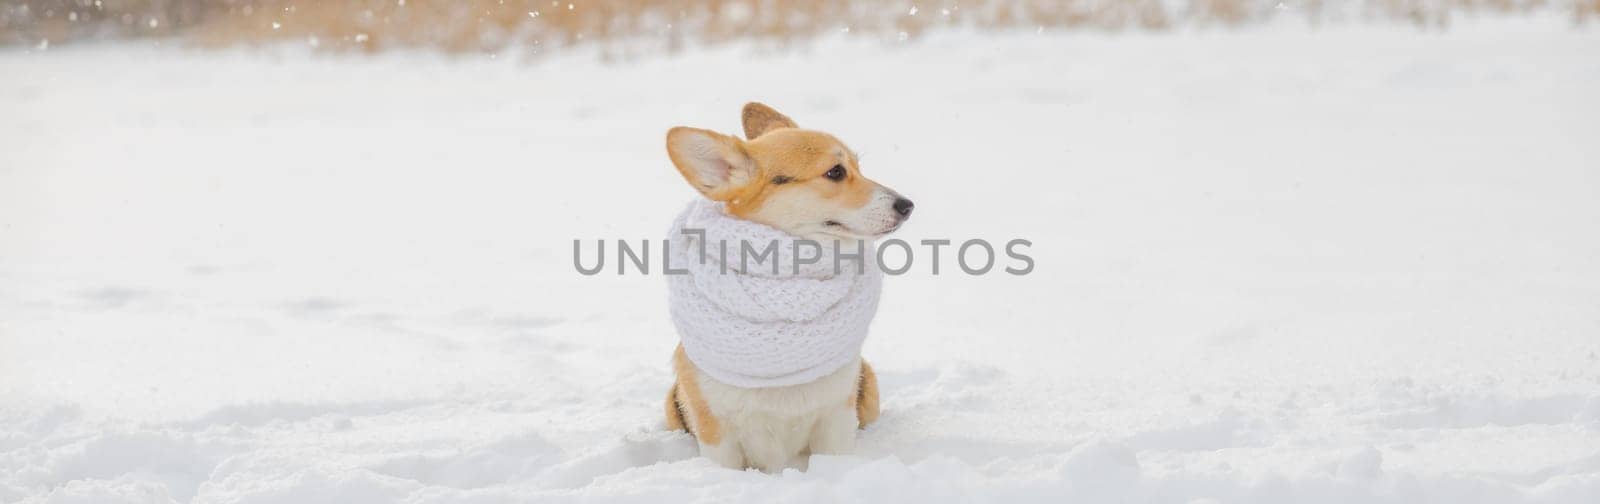 beautiful portrait funny a Corgi dog puppy sits in a winter Park in a knitted warm white scarf under the falling snow.Corgi puppy dressed up outdoors.copy space by YuliaYaspe1979